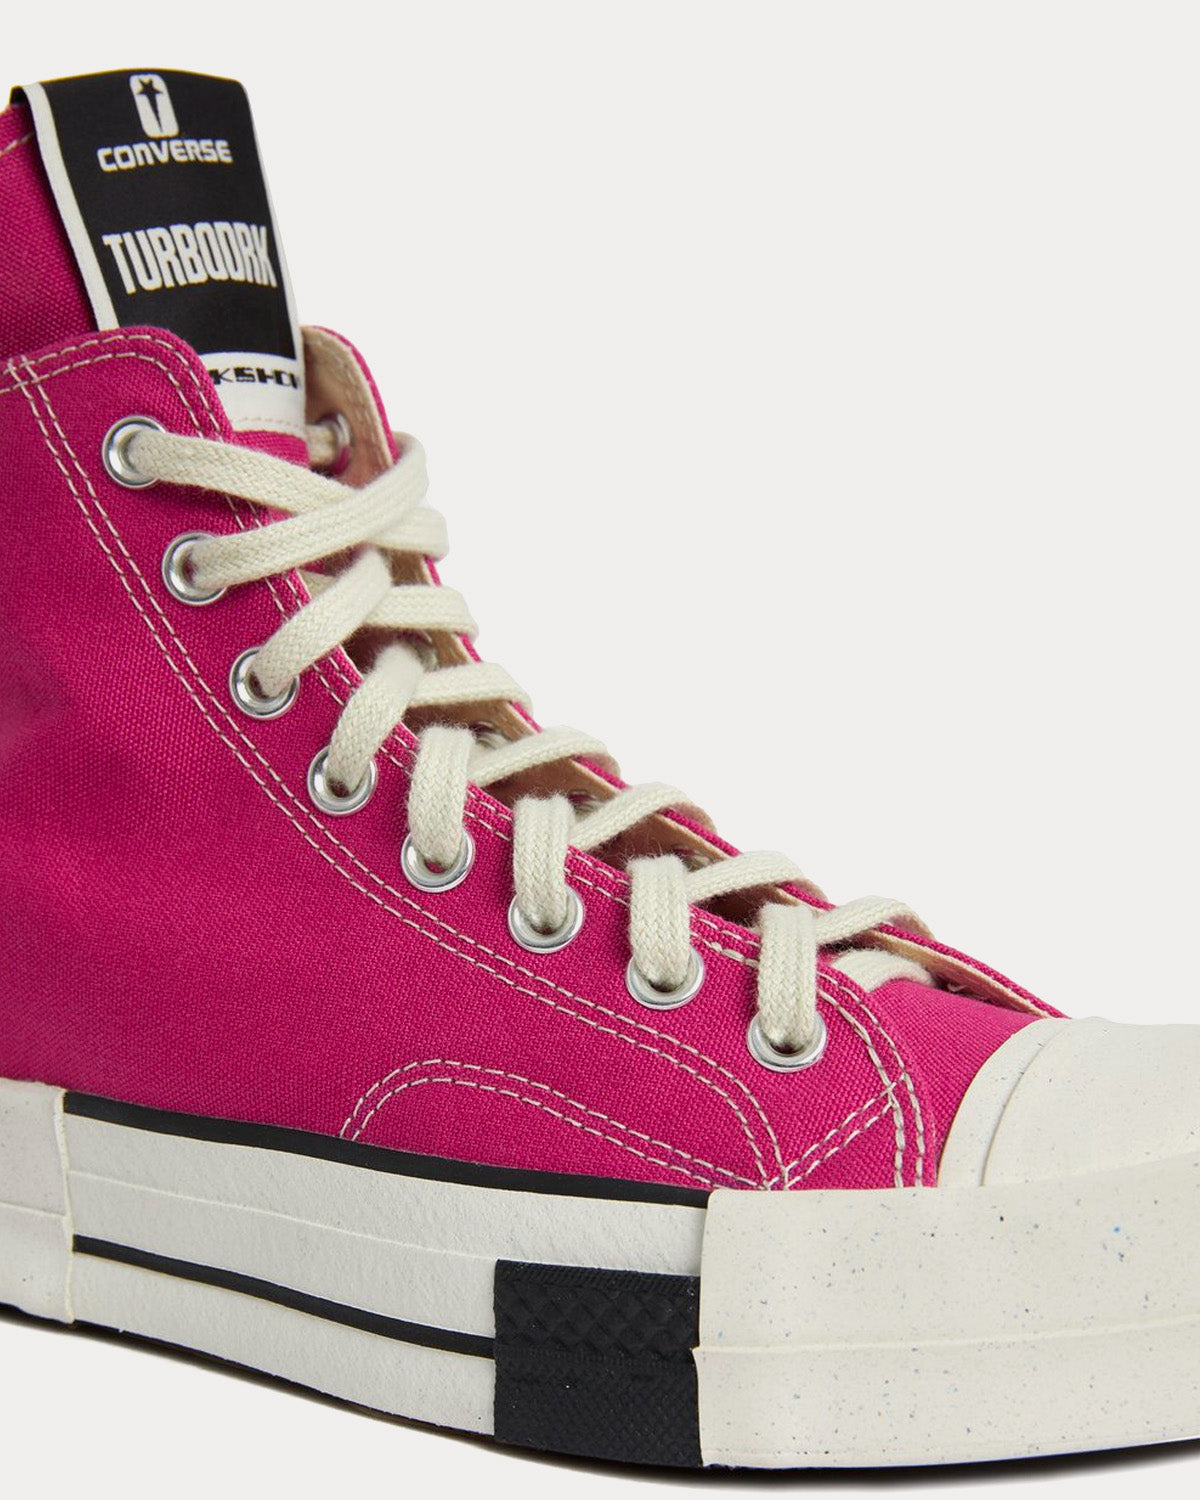 Converse x Rick Owens DRKSHDW - Chuck 70 Laceless Hot Pink / White High Top Sneakers